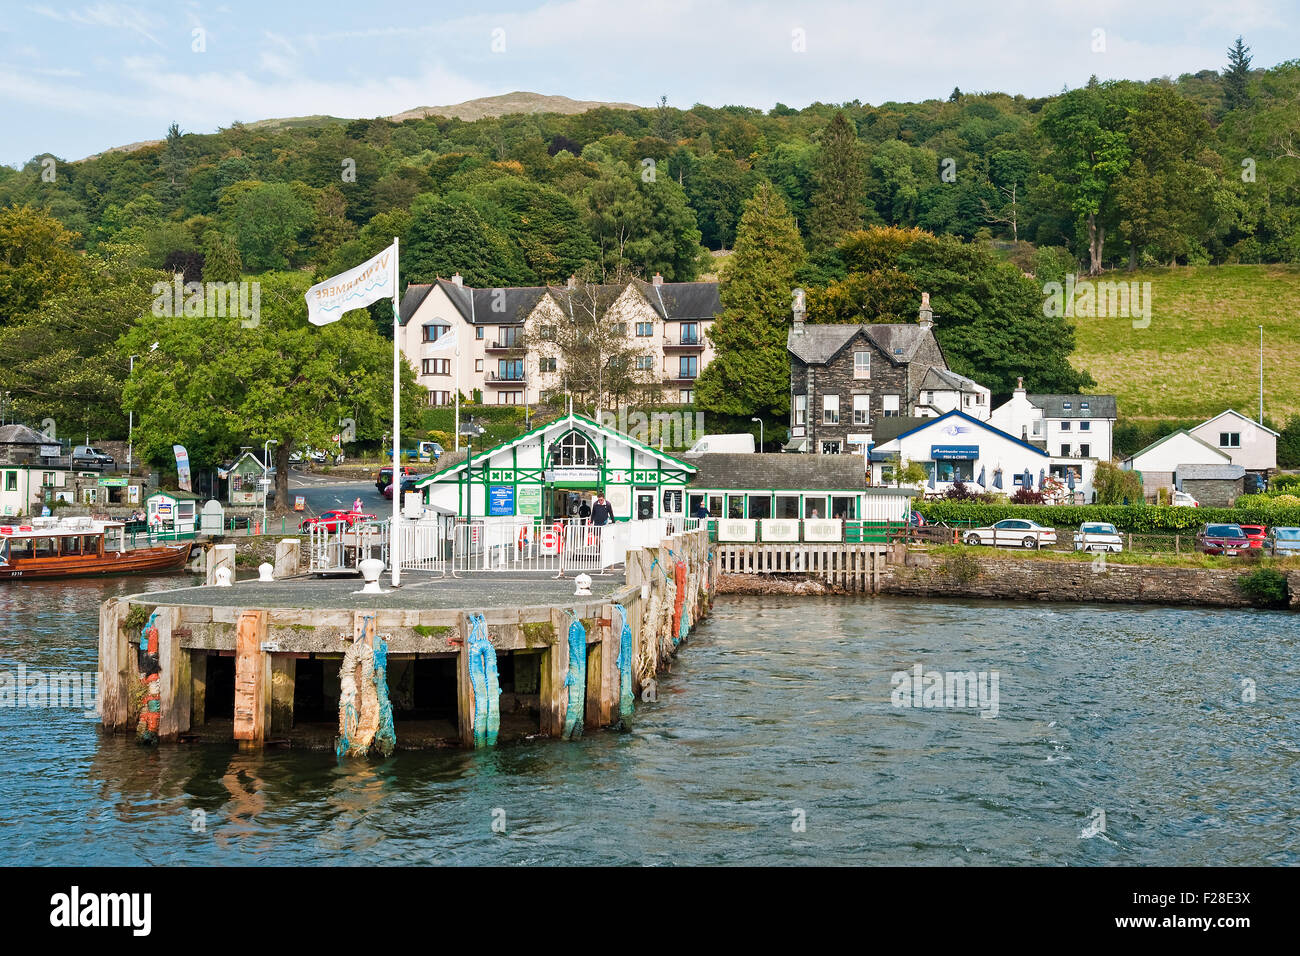 Ambleside Pier at Waterhead on Lake Windermere, seen from a lake steamer approaching the pier Stock Photo